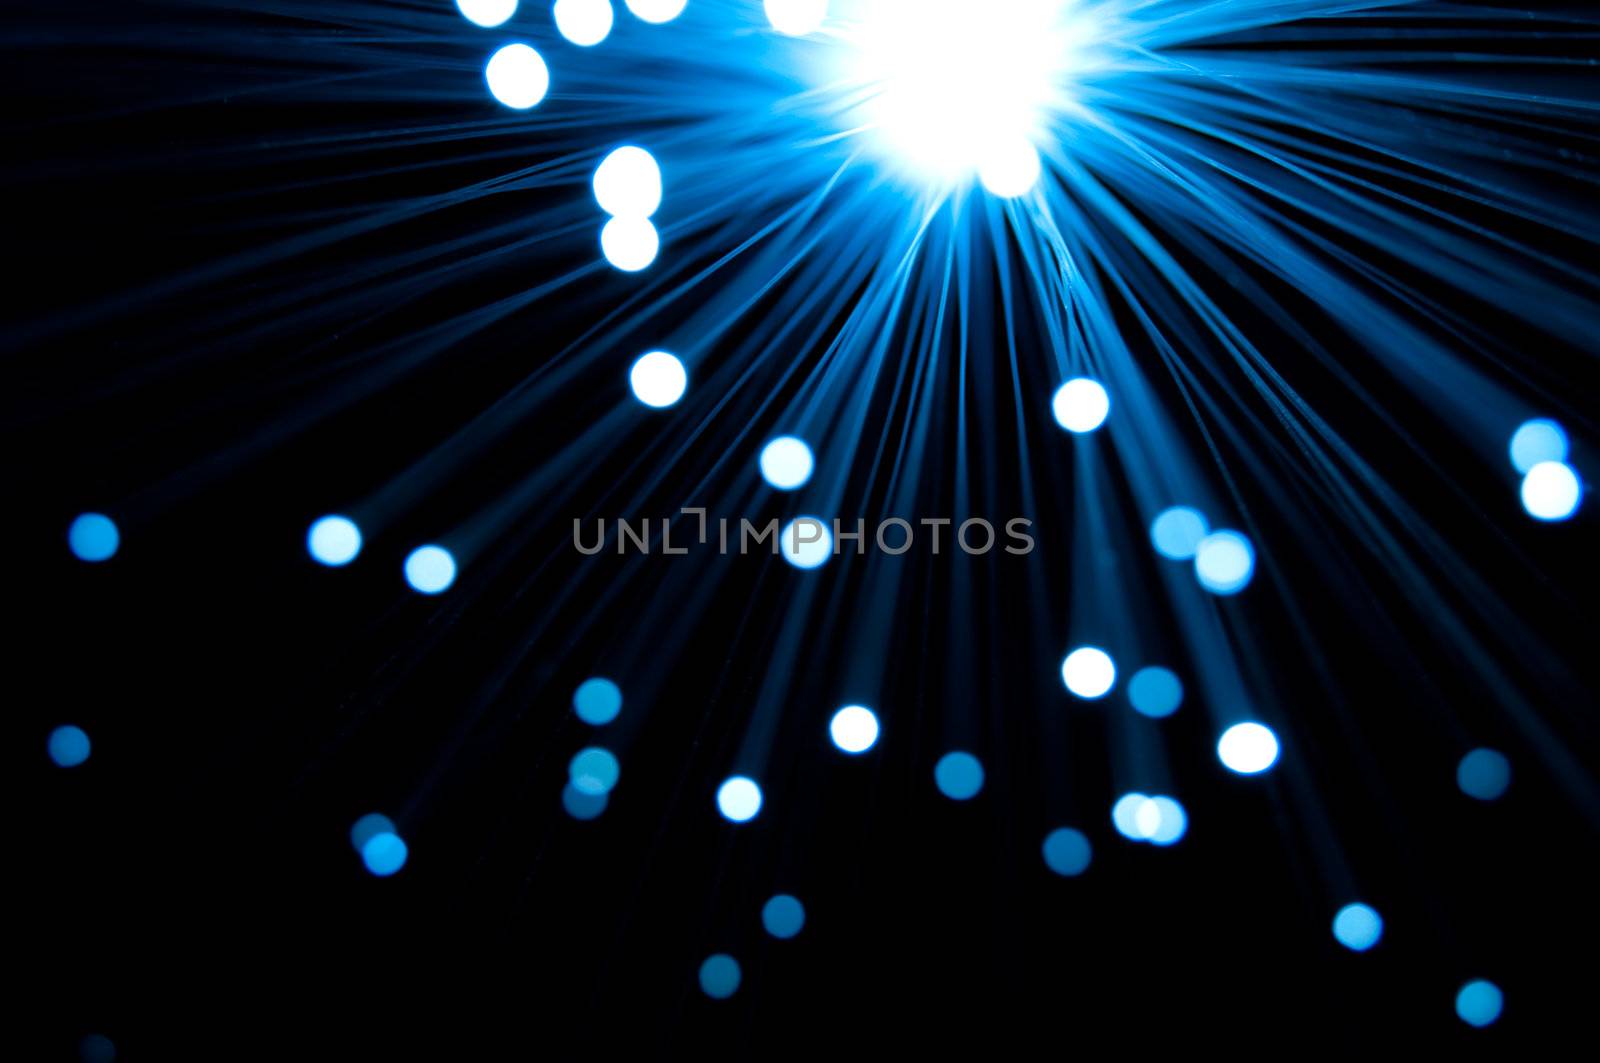 Close and abstract style capturing the ends of many blue fibre optic light strands emitted from a central light source against black.